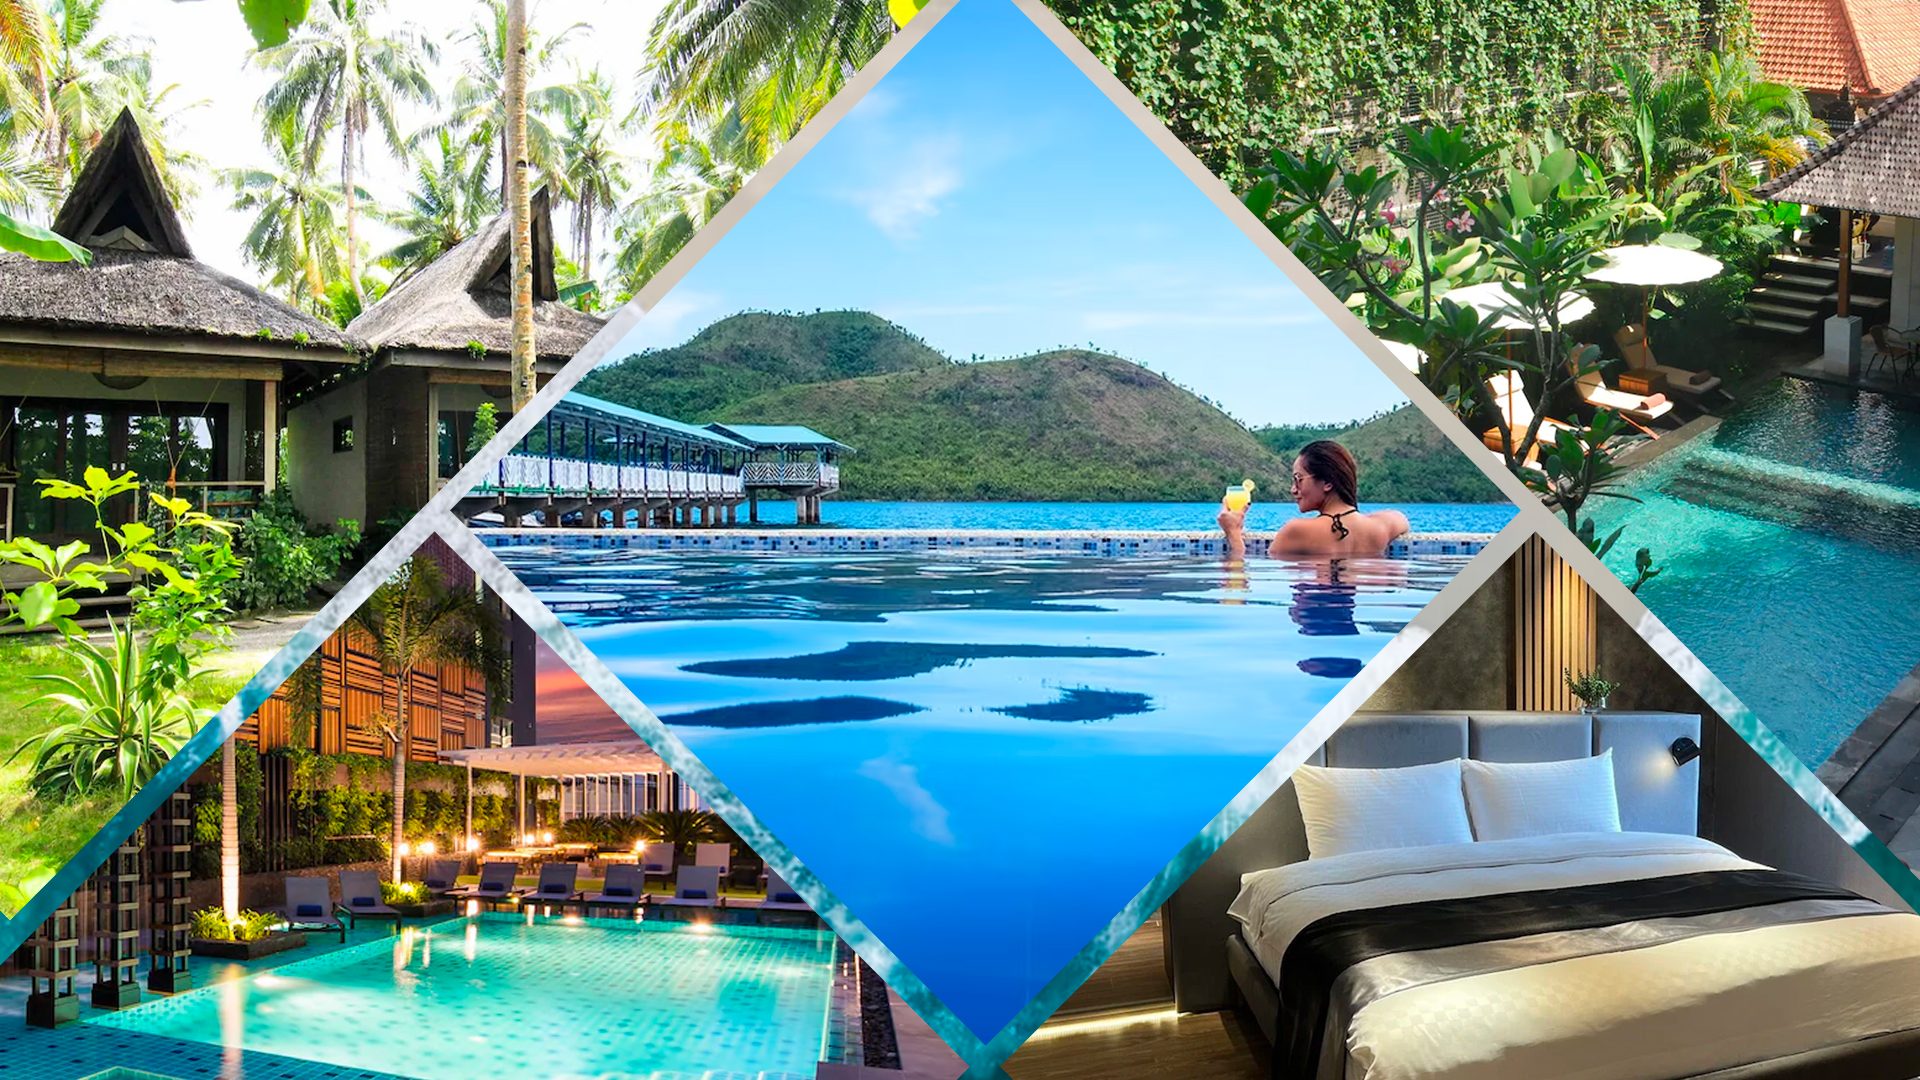 5 accommodations under P5,000 per night that you can book via PAL Holidays